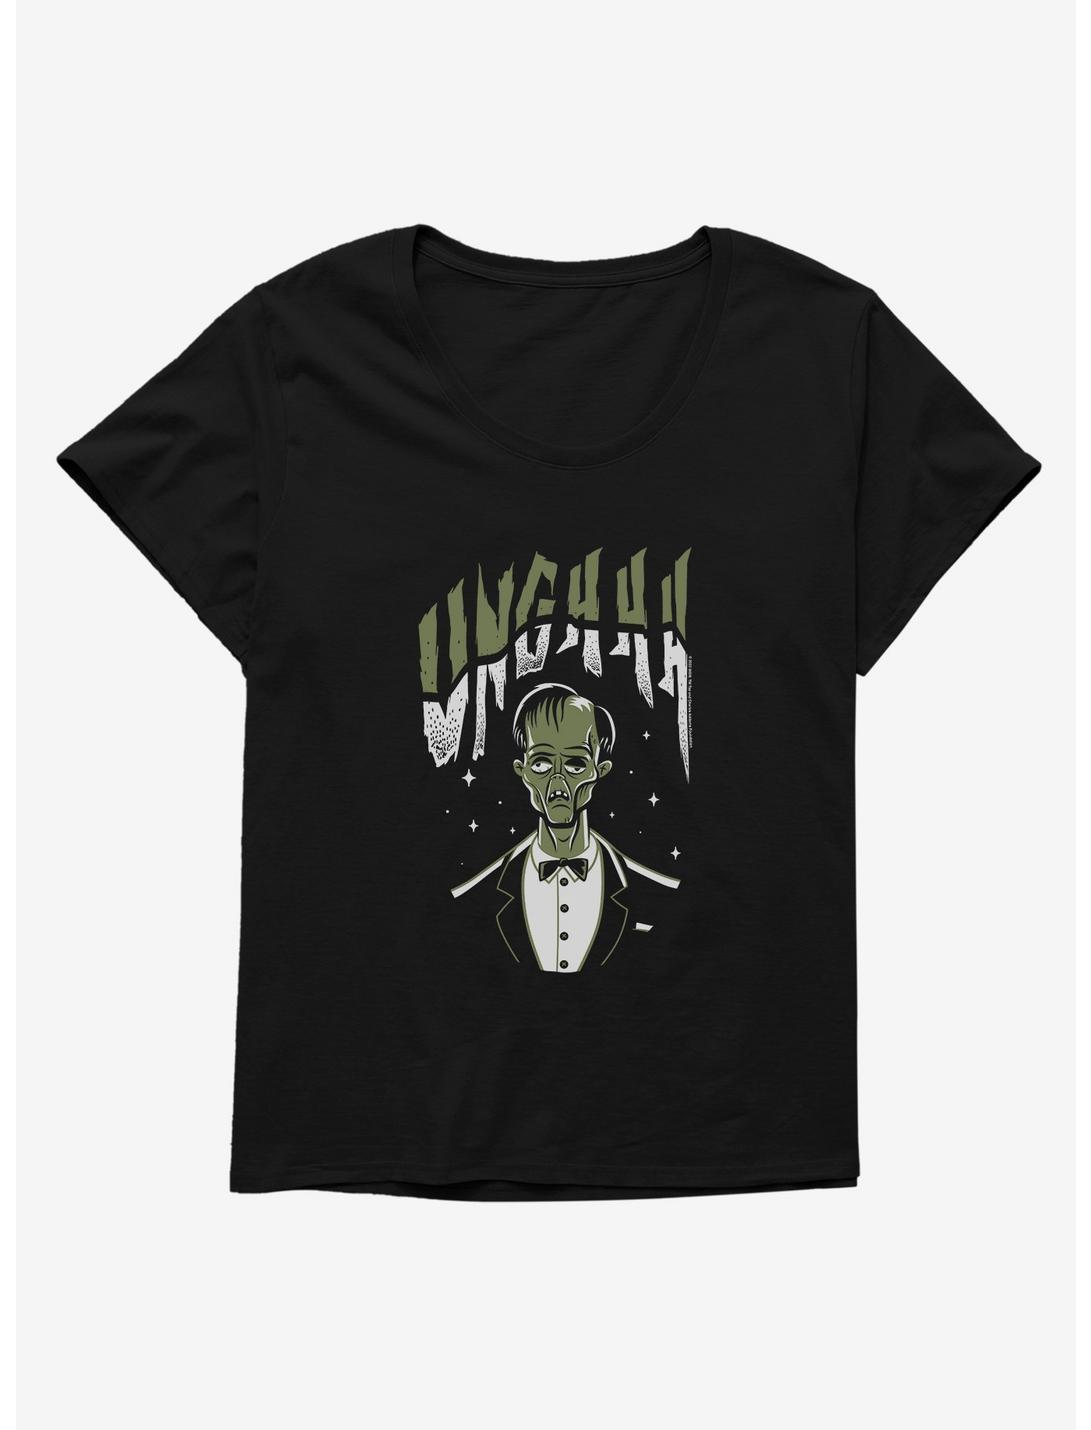 Addams Family Movie Caricature Lurch Unghhh Womens T-Shirt Plus Size, BLACK, hi-res